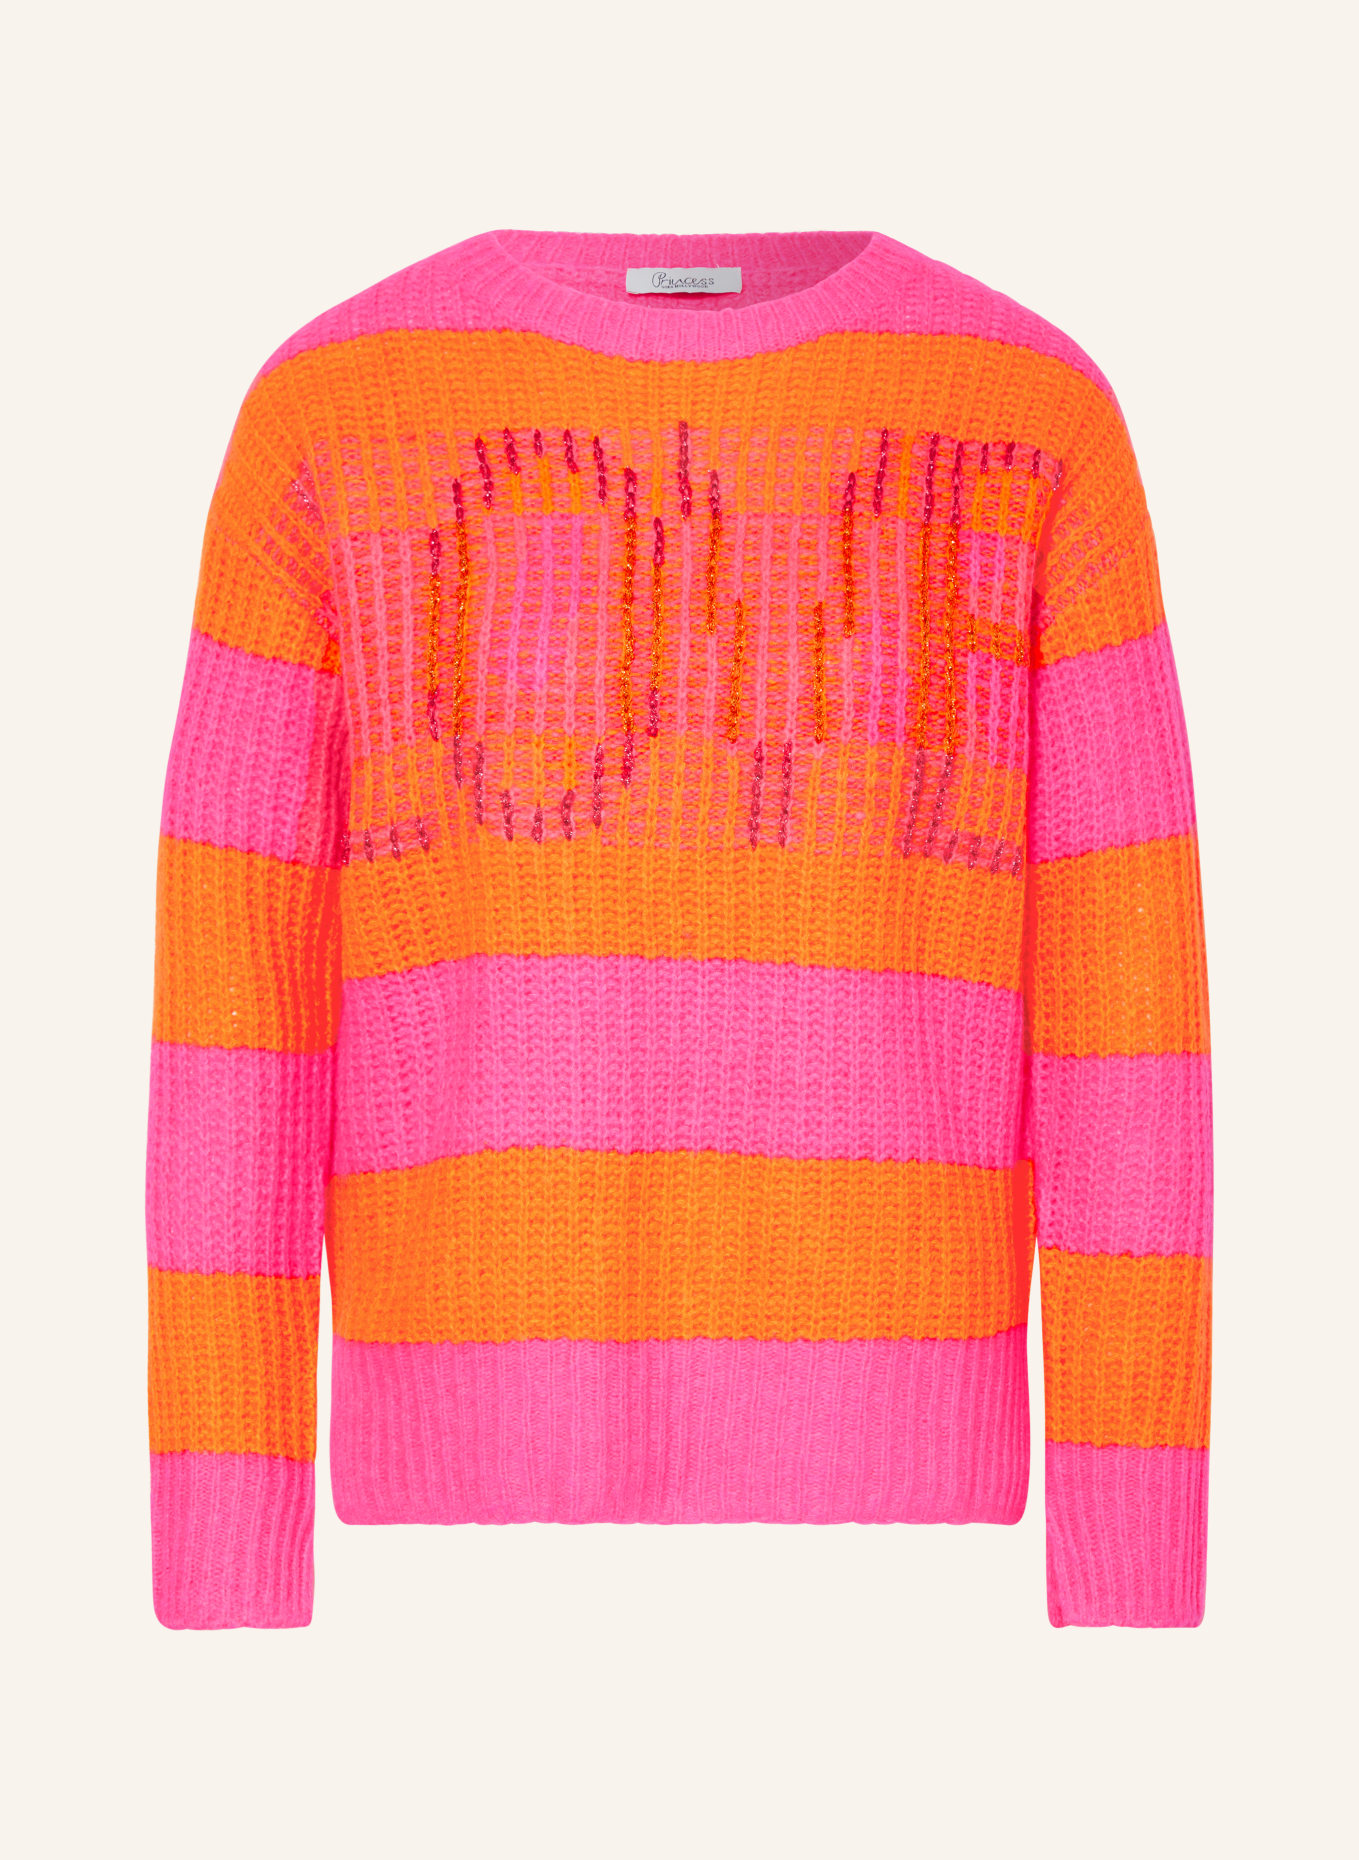 Princess GOES HOLLYWOOD Sweater with glitter thread, Color: PINK/ ORANGE (Image 1)